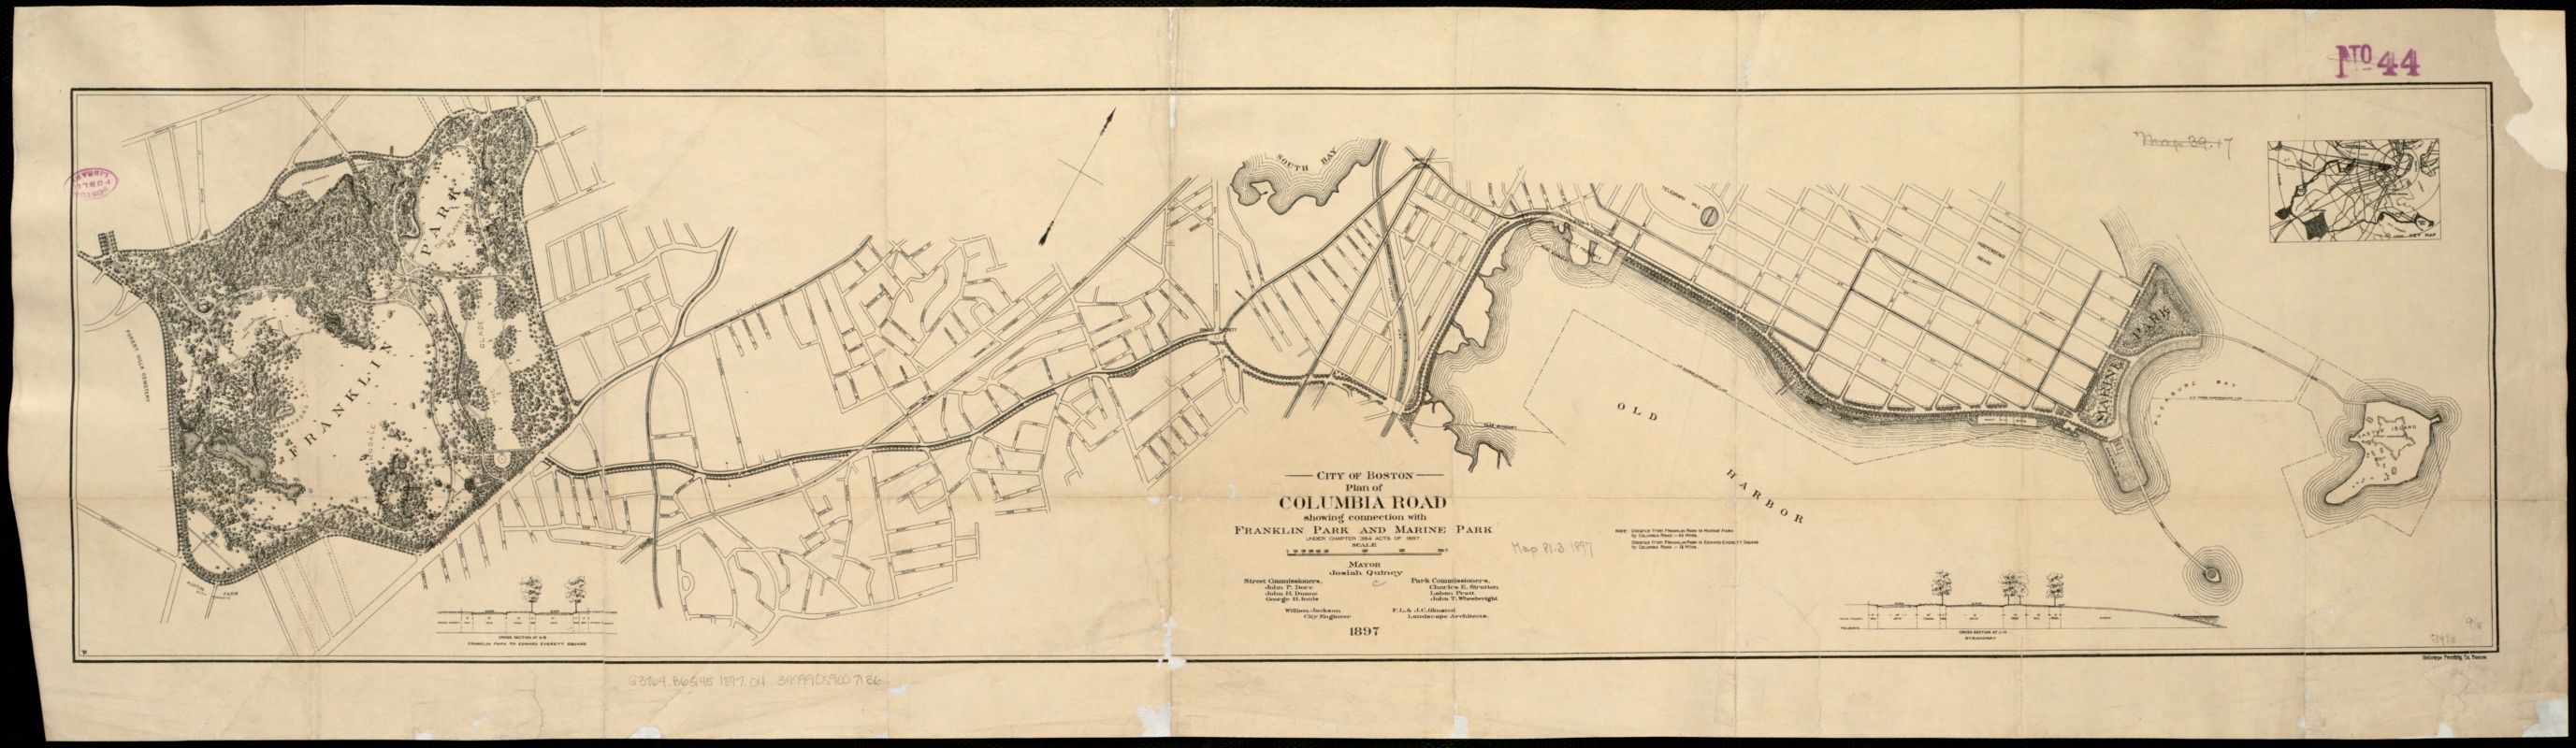 Image of City of Boston Plan of Columbia Road, Showing Connection with Franklin Park and Marine Park